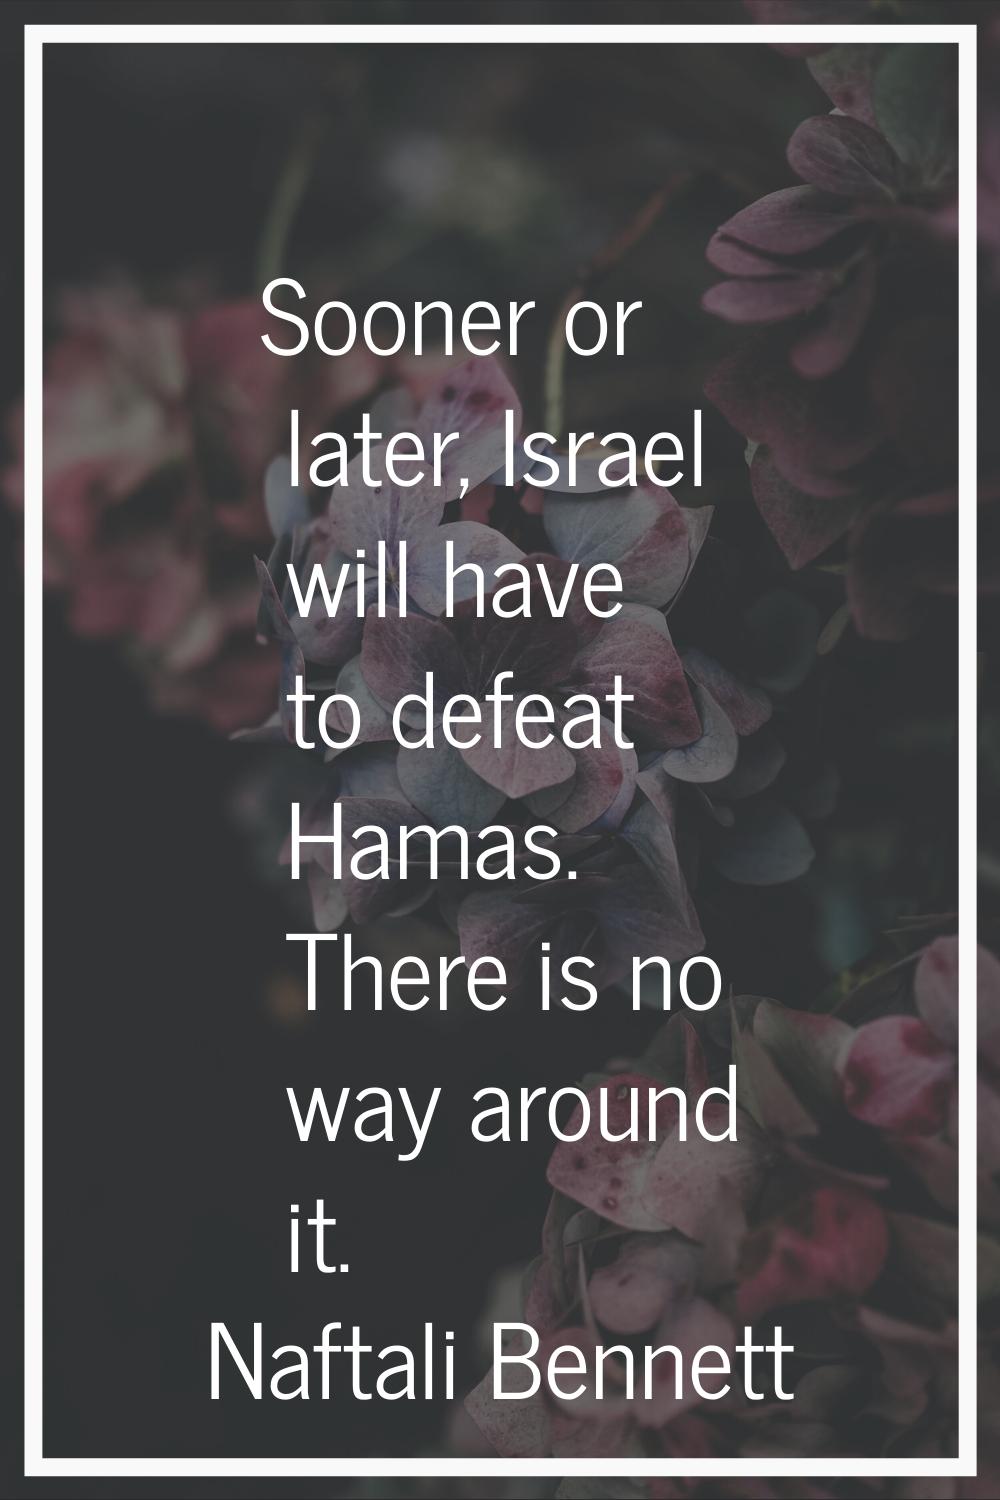 Sooner or later, Israel will have to defeat Hamas. There is no way around it.